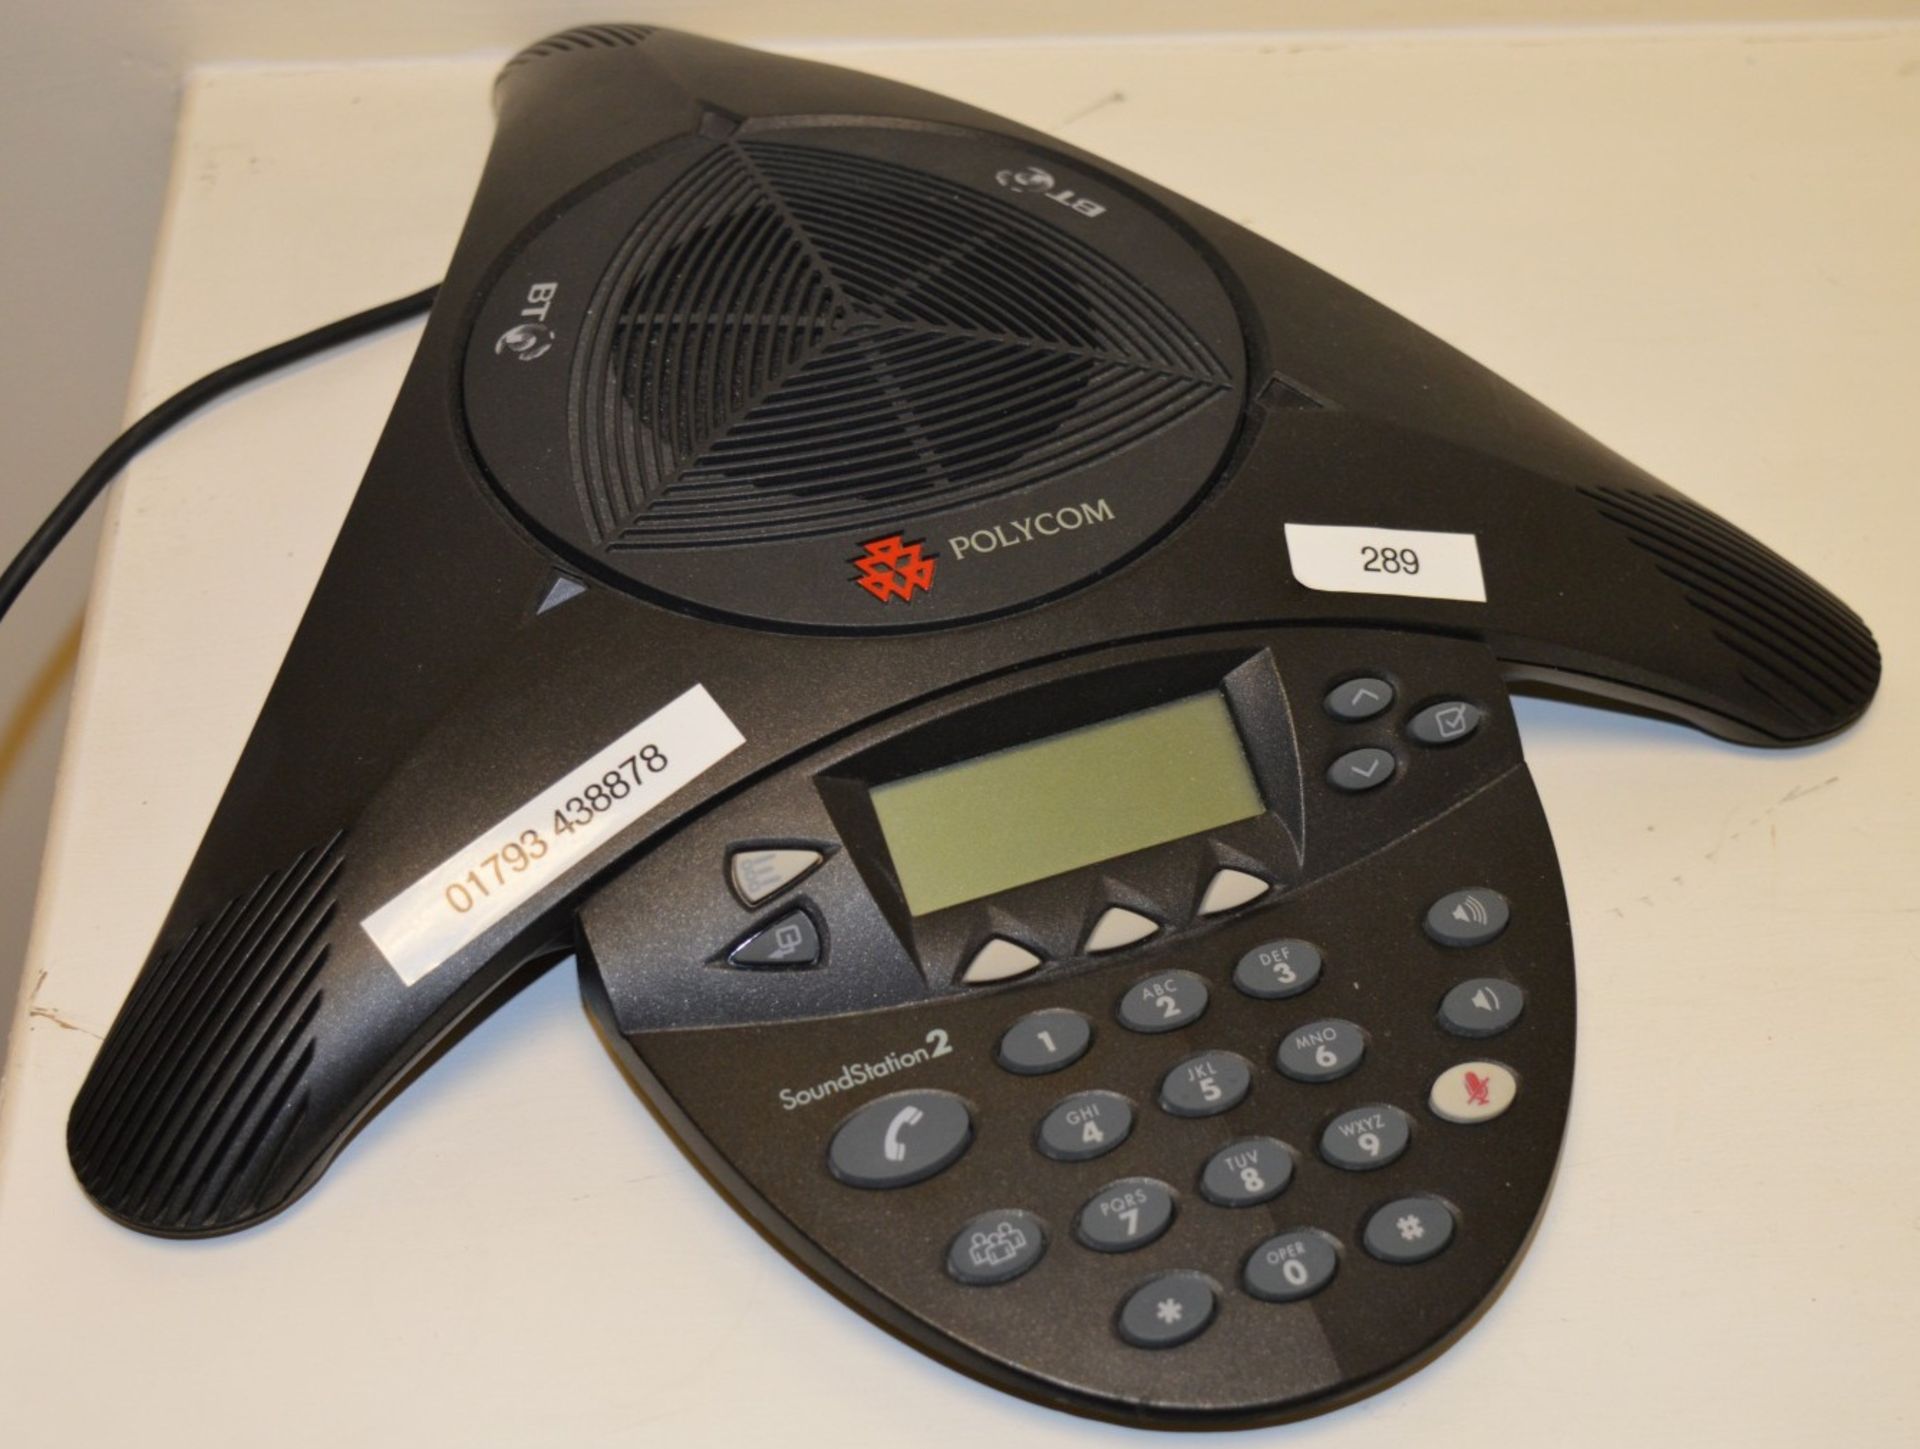 1 x Polycom Soundstation 2 LCD Conference Phone - Model 2201-1600-01 - Features 3 Cardioid